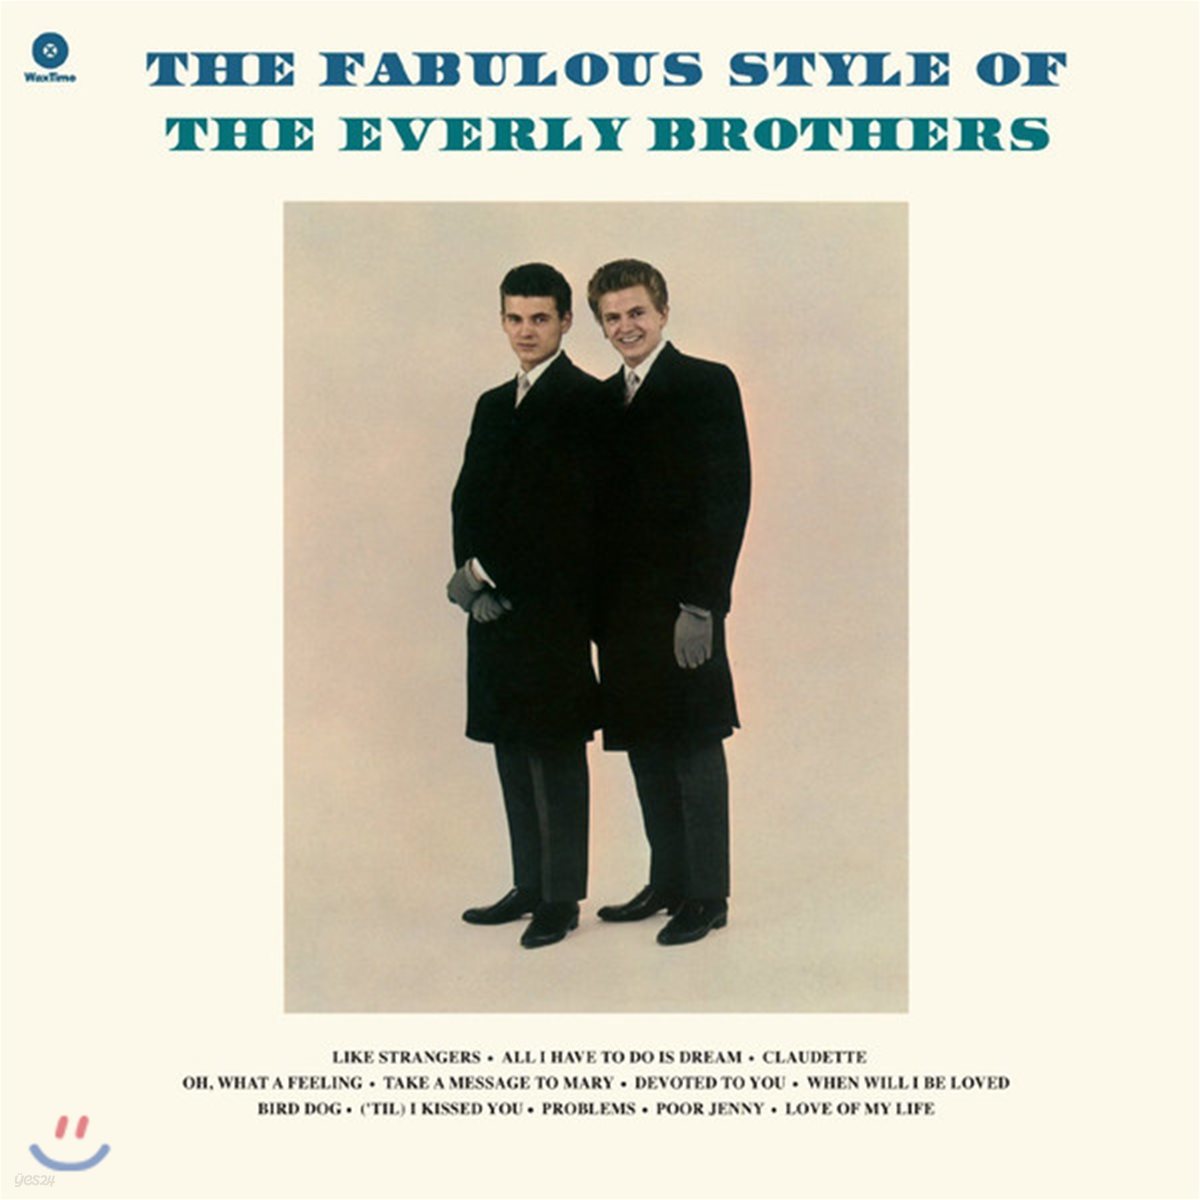 The Everly Brothers (더 에벌리 브라더스) - The Fabulous Style of [LP]